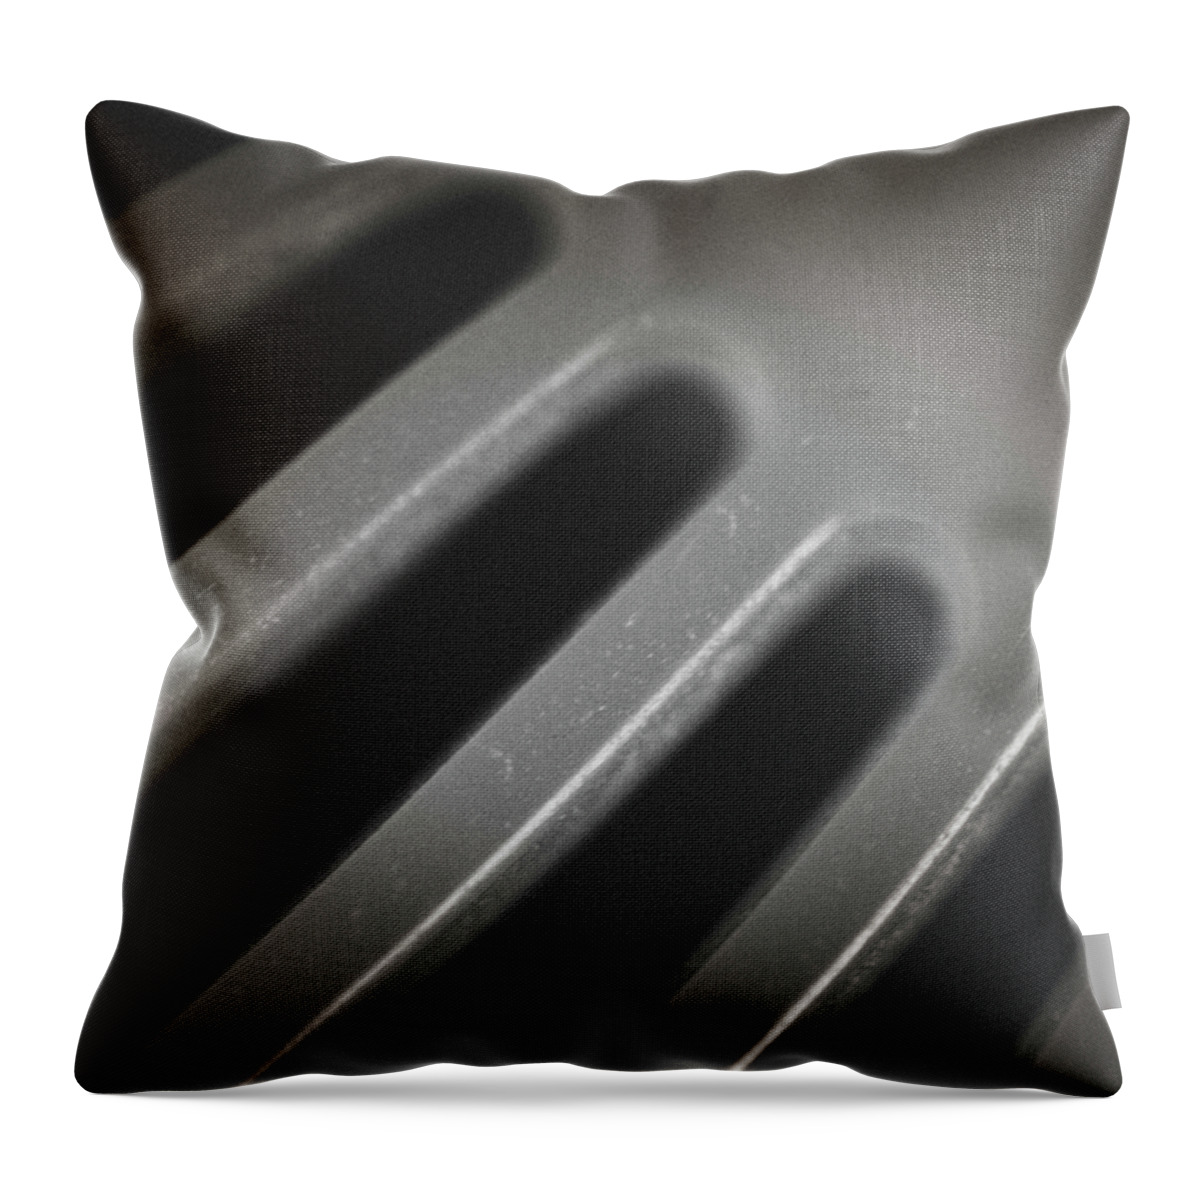 Abstract Throw Pillow featuring the photograph Shadowed Spokes by Christi Kraft